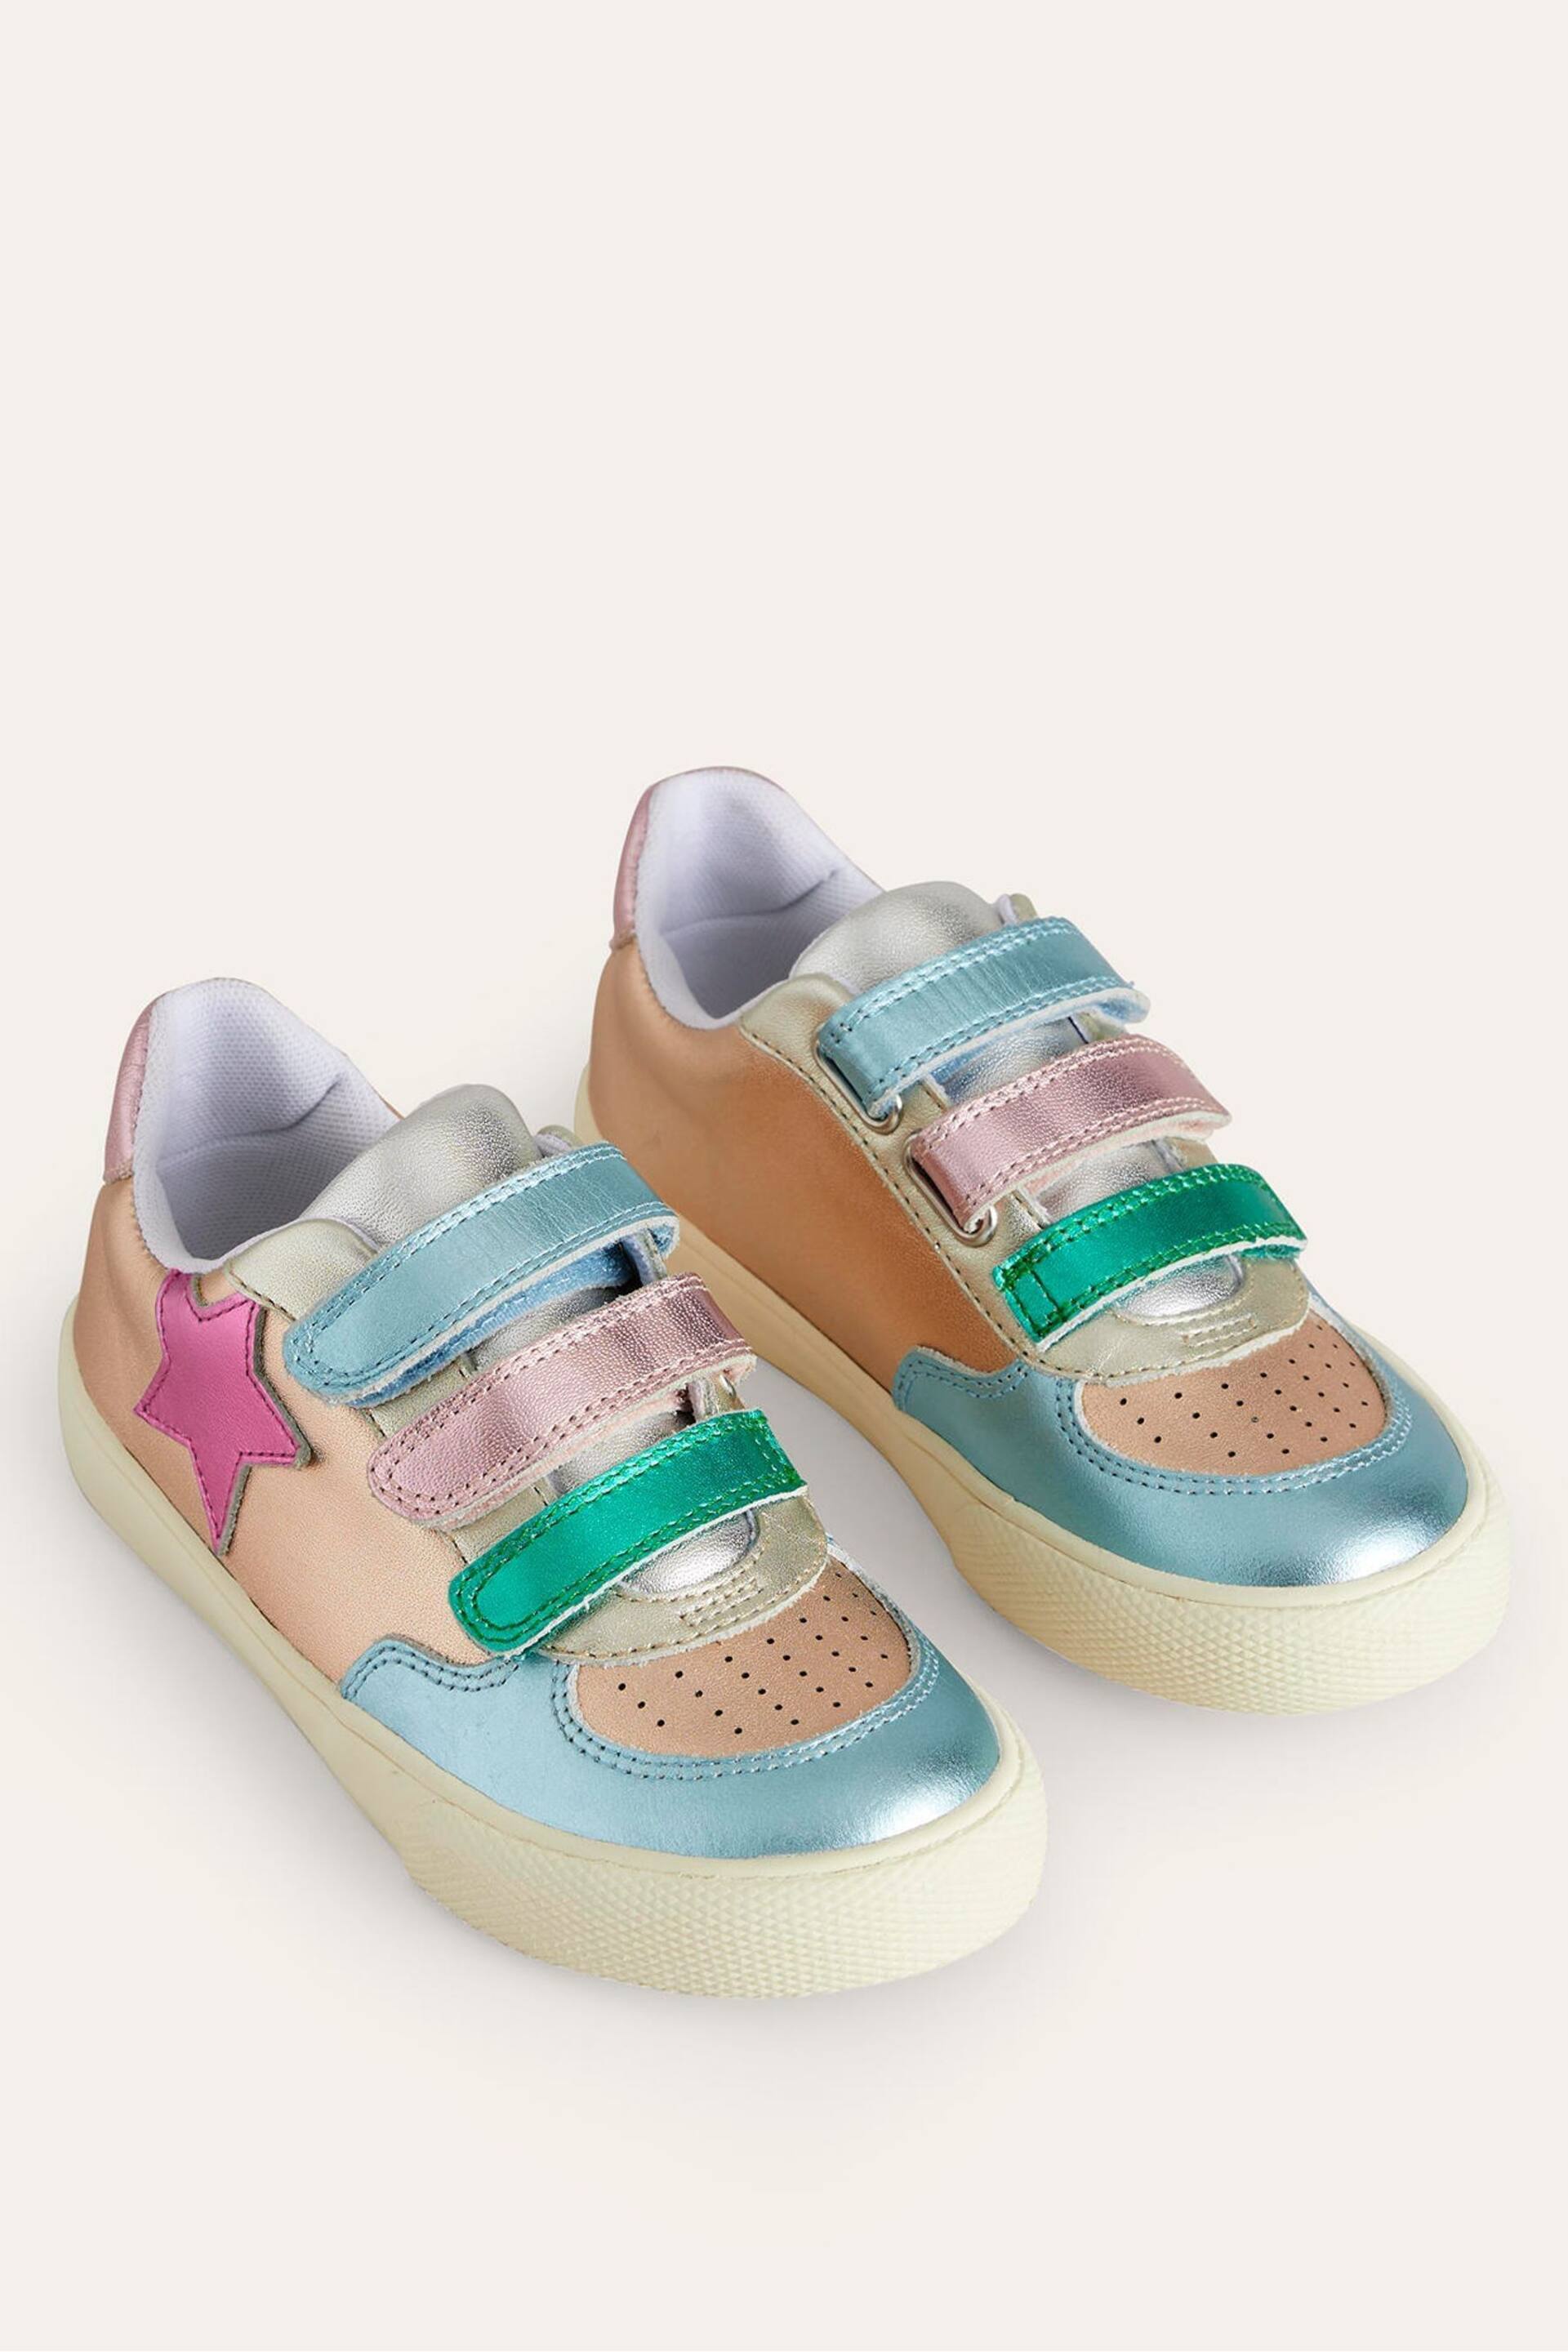 Boden Natural Leather Low Top - Image 2 of 3